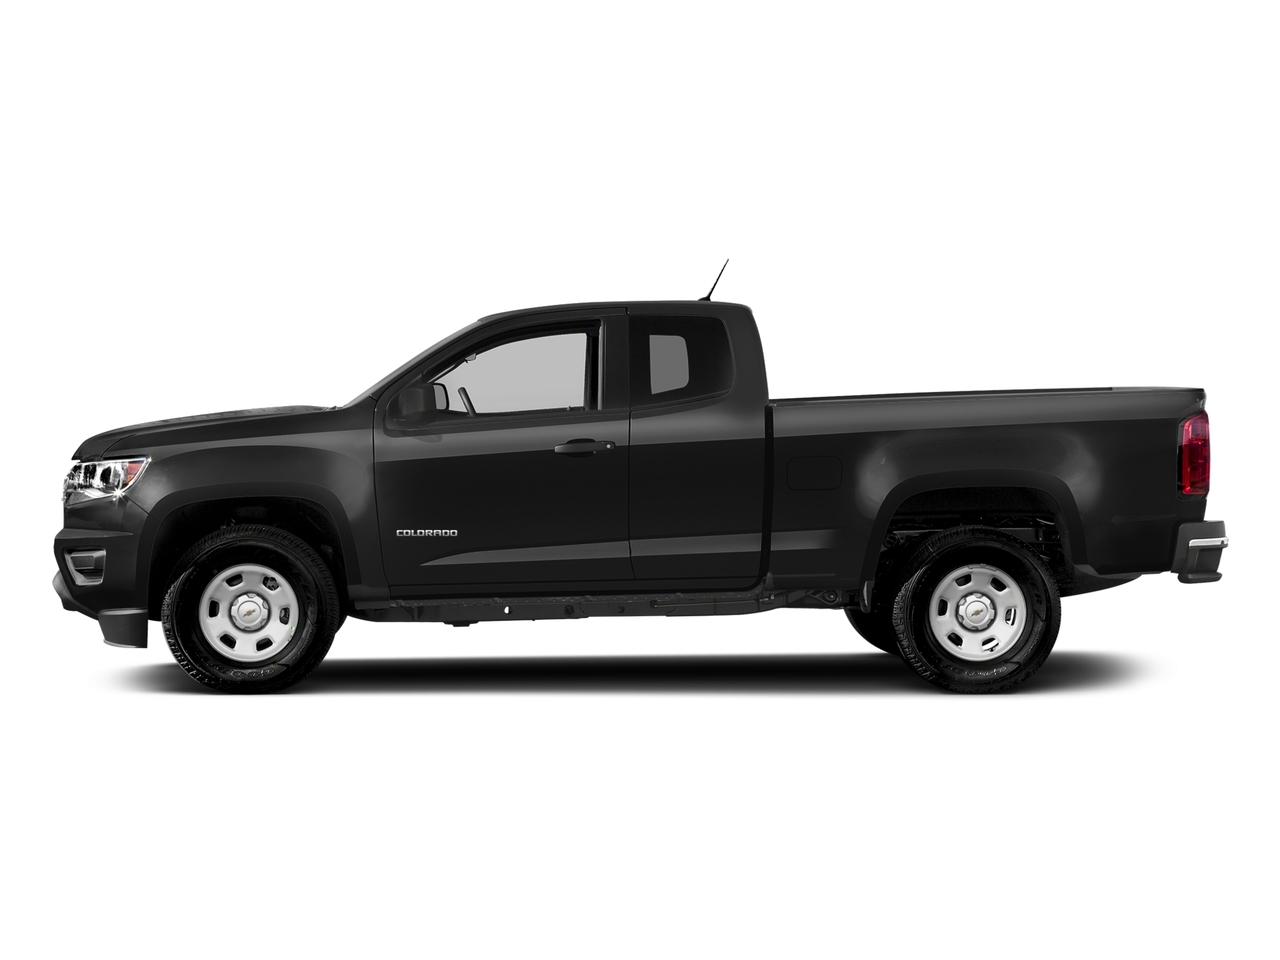 Used 2018 Chevrolet Colorado Work Truck with VIN 1GCHSBEA2J1326954 for sale in Republic, MO